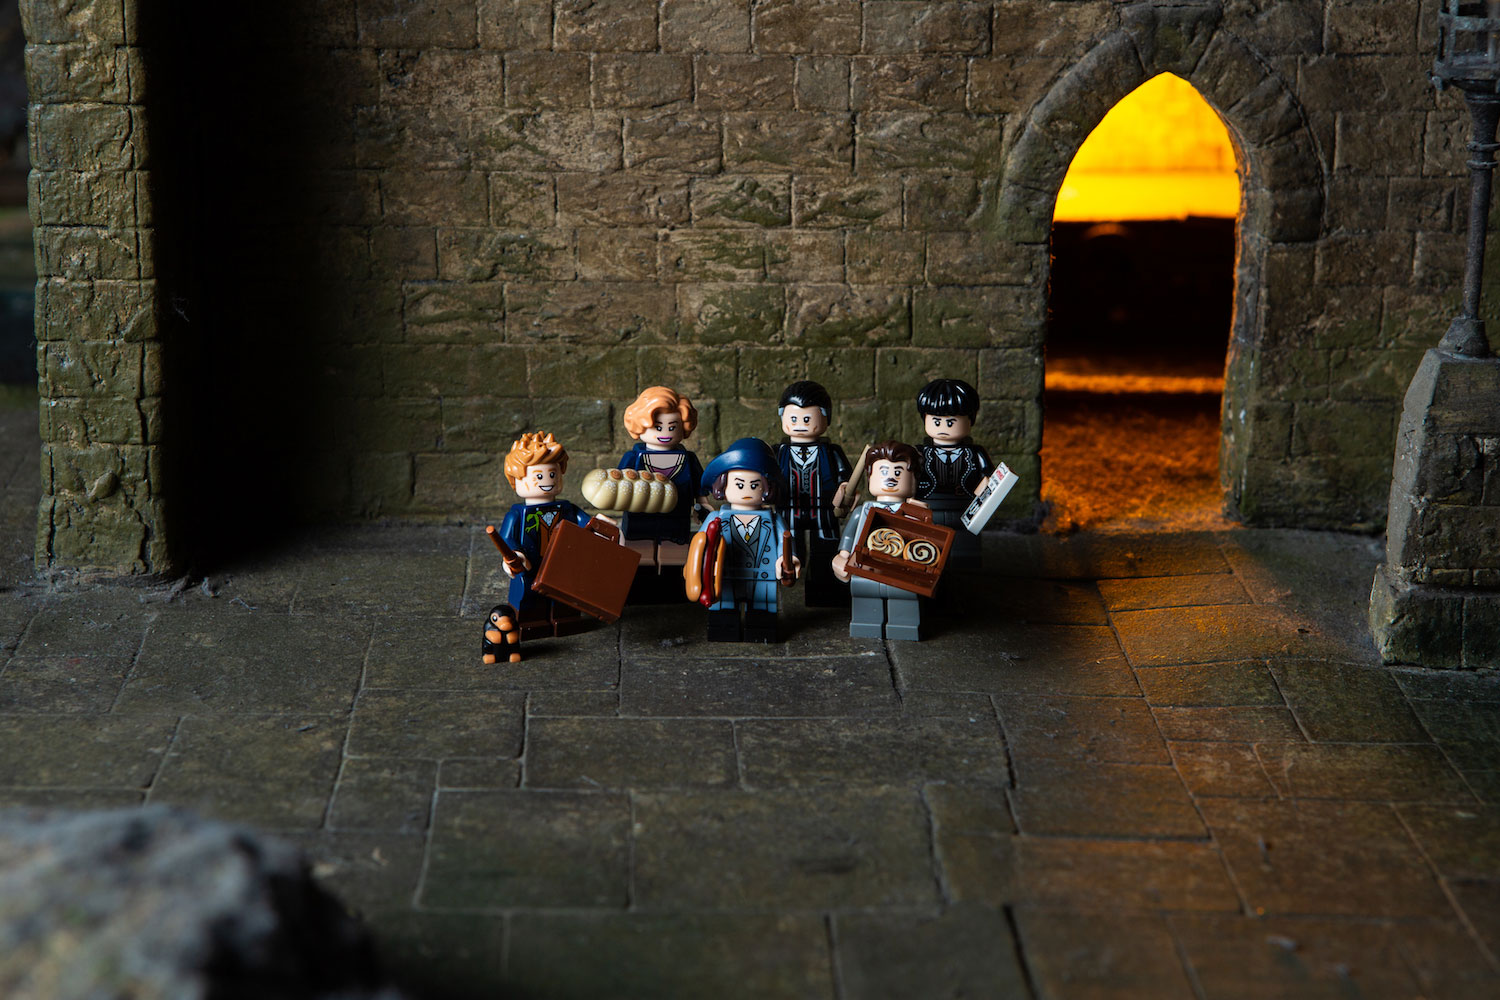 Credence, Graves, Jacob, Newt, Queenie, and Tina represent “Fantastic Beasts” in the new LEGO minifigures wizarding world series.